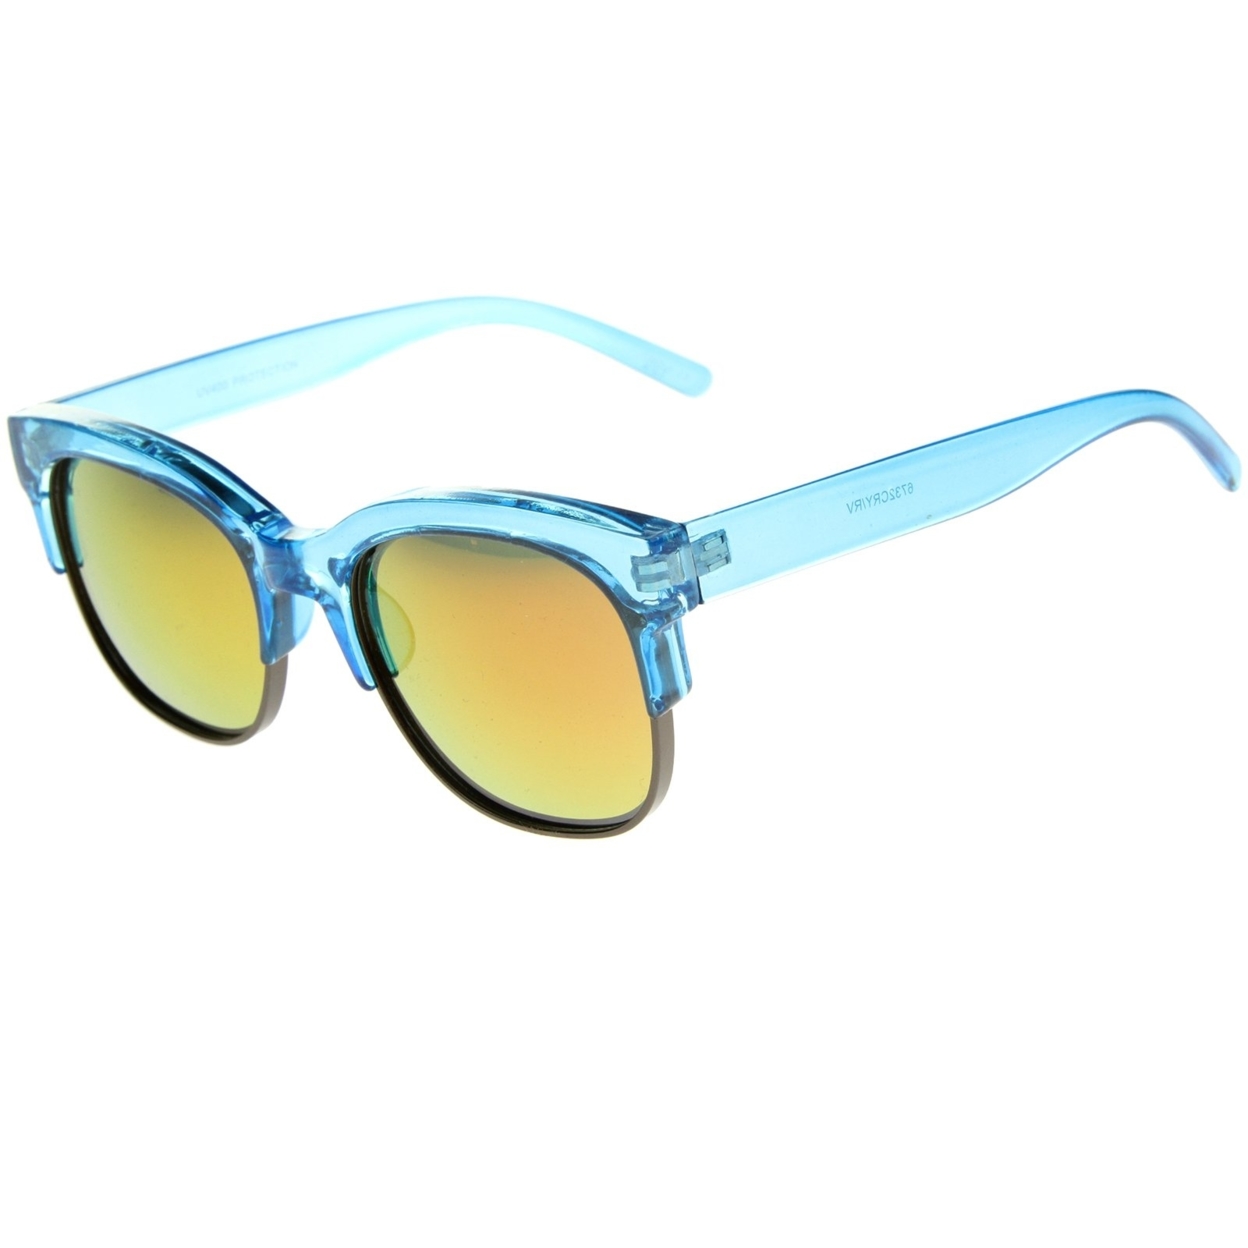 Bold Colorful Half-Frame Two-Toned Inset Mirrored Lens Horn Rimmed Sunglasses - Blue-Gunmetal / Red Mirror